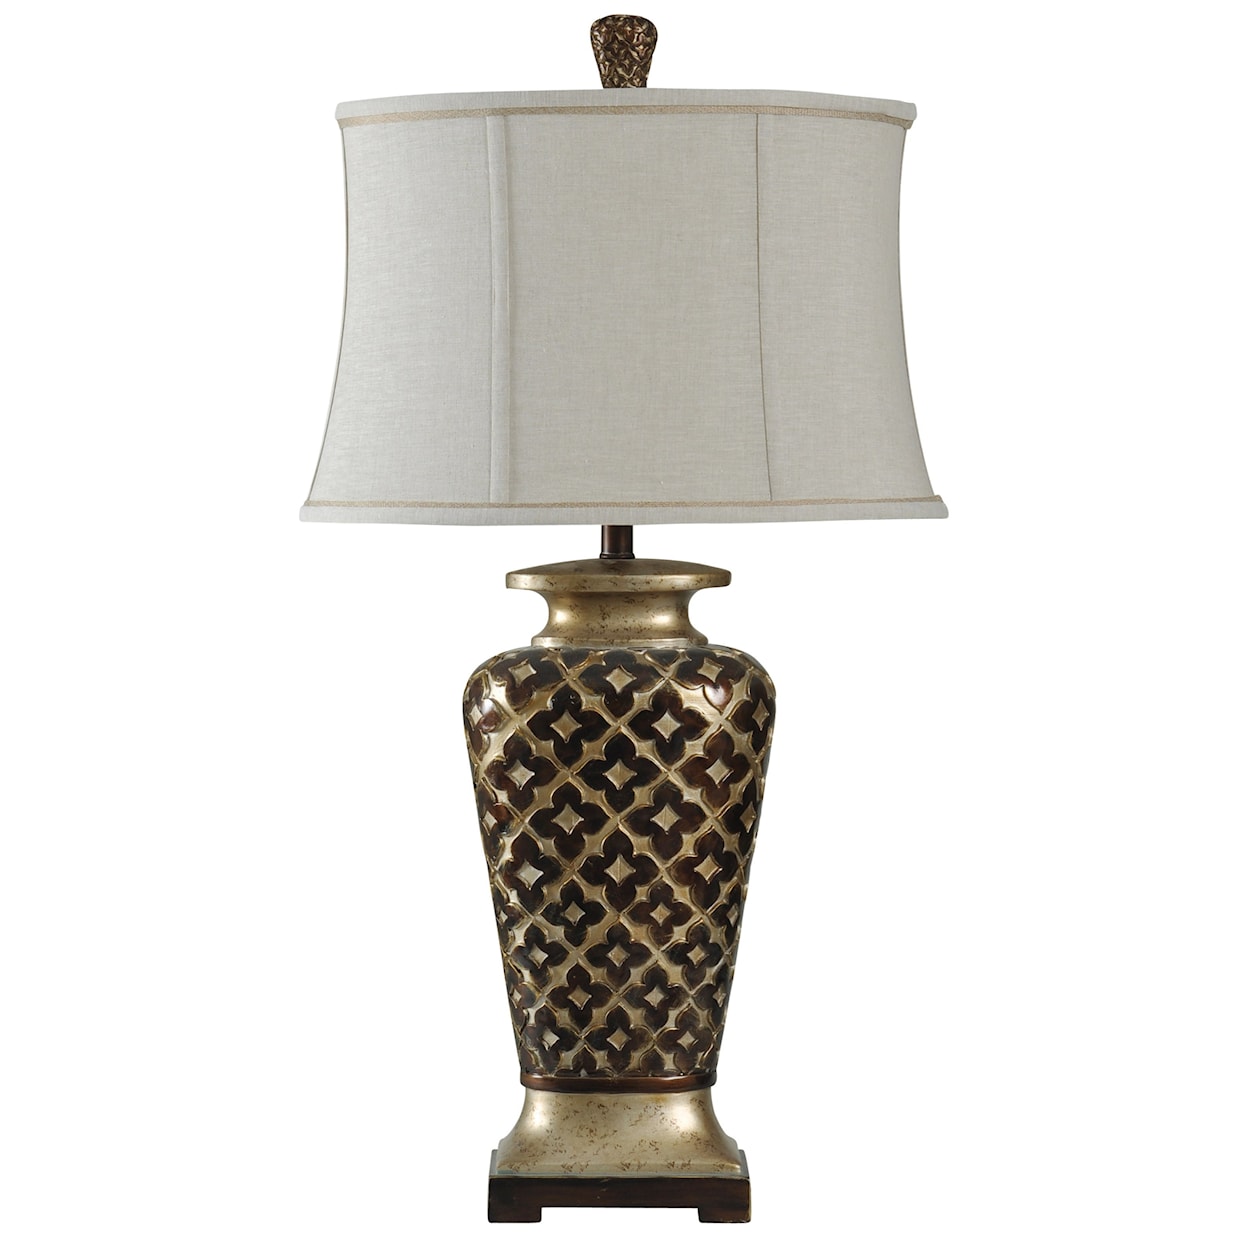 StyleCraft Lamps Traditional Raise Patterned Lamp